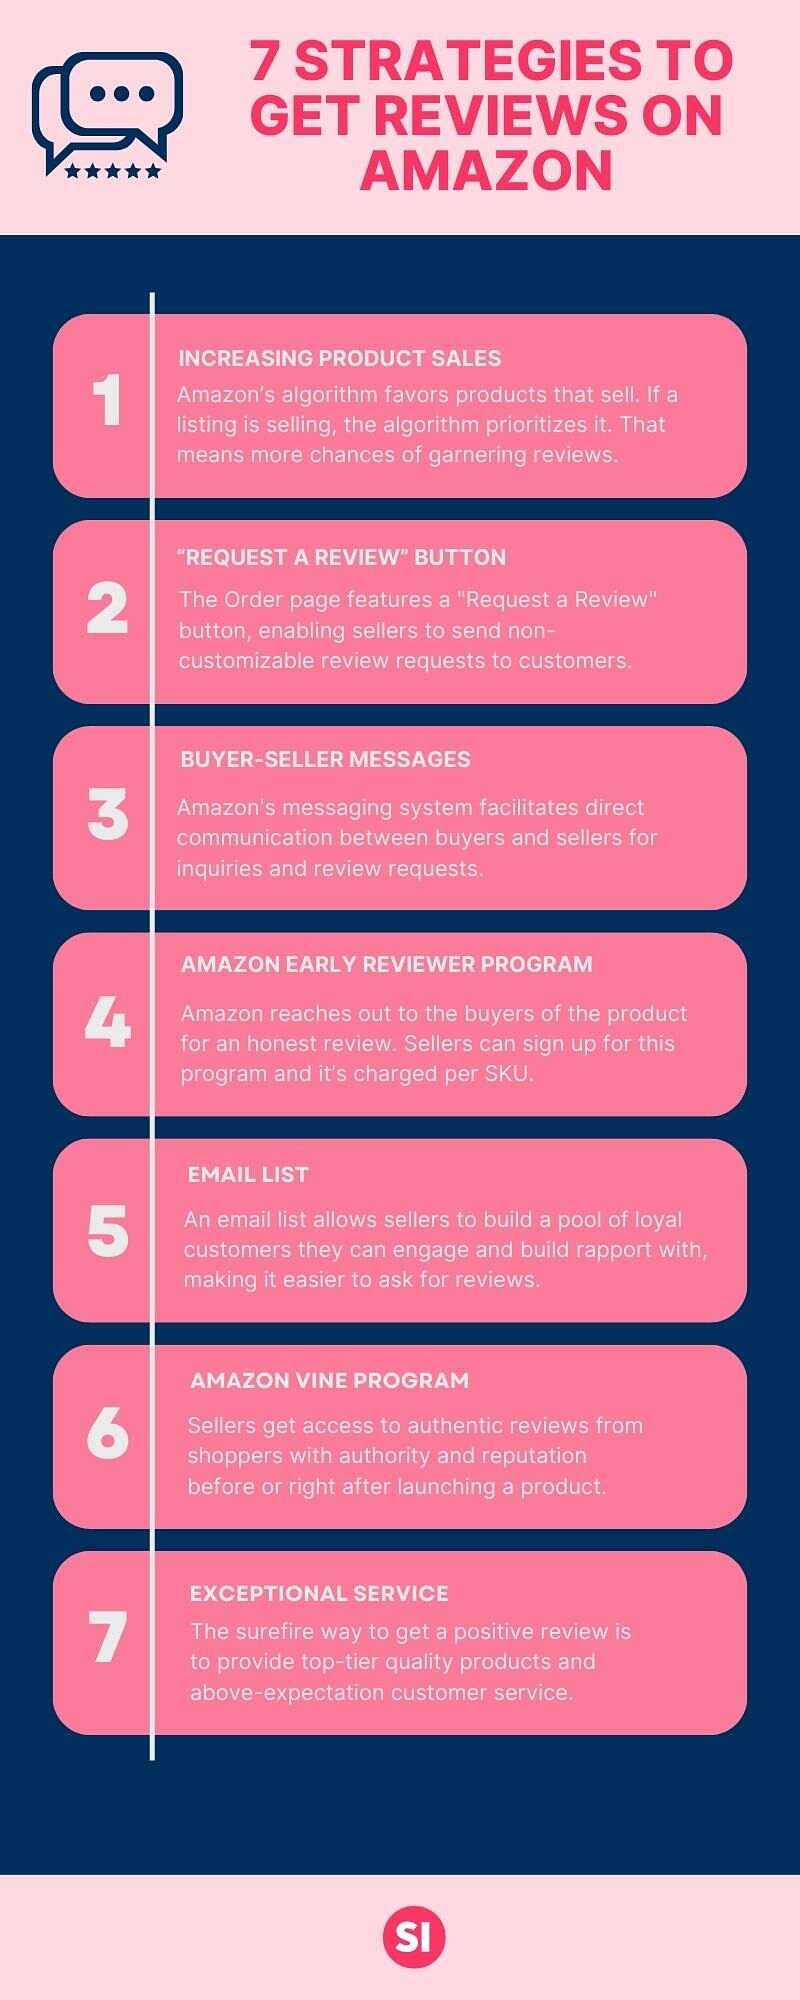 An infographic showing the seven strategies a seller can use to get reviews on Amazon: Increase product sales, Use the request a review button, buyer-seller messages, Amazon early reviewer program, build an email list, enroll to the Amazon vine program, provide above and beyond customer experience.